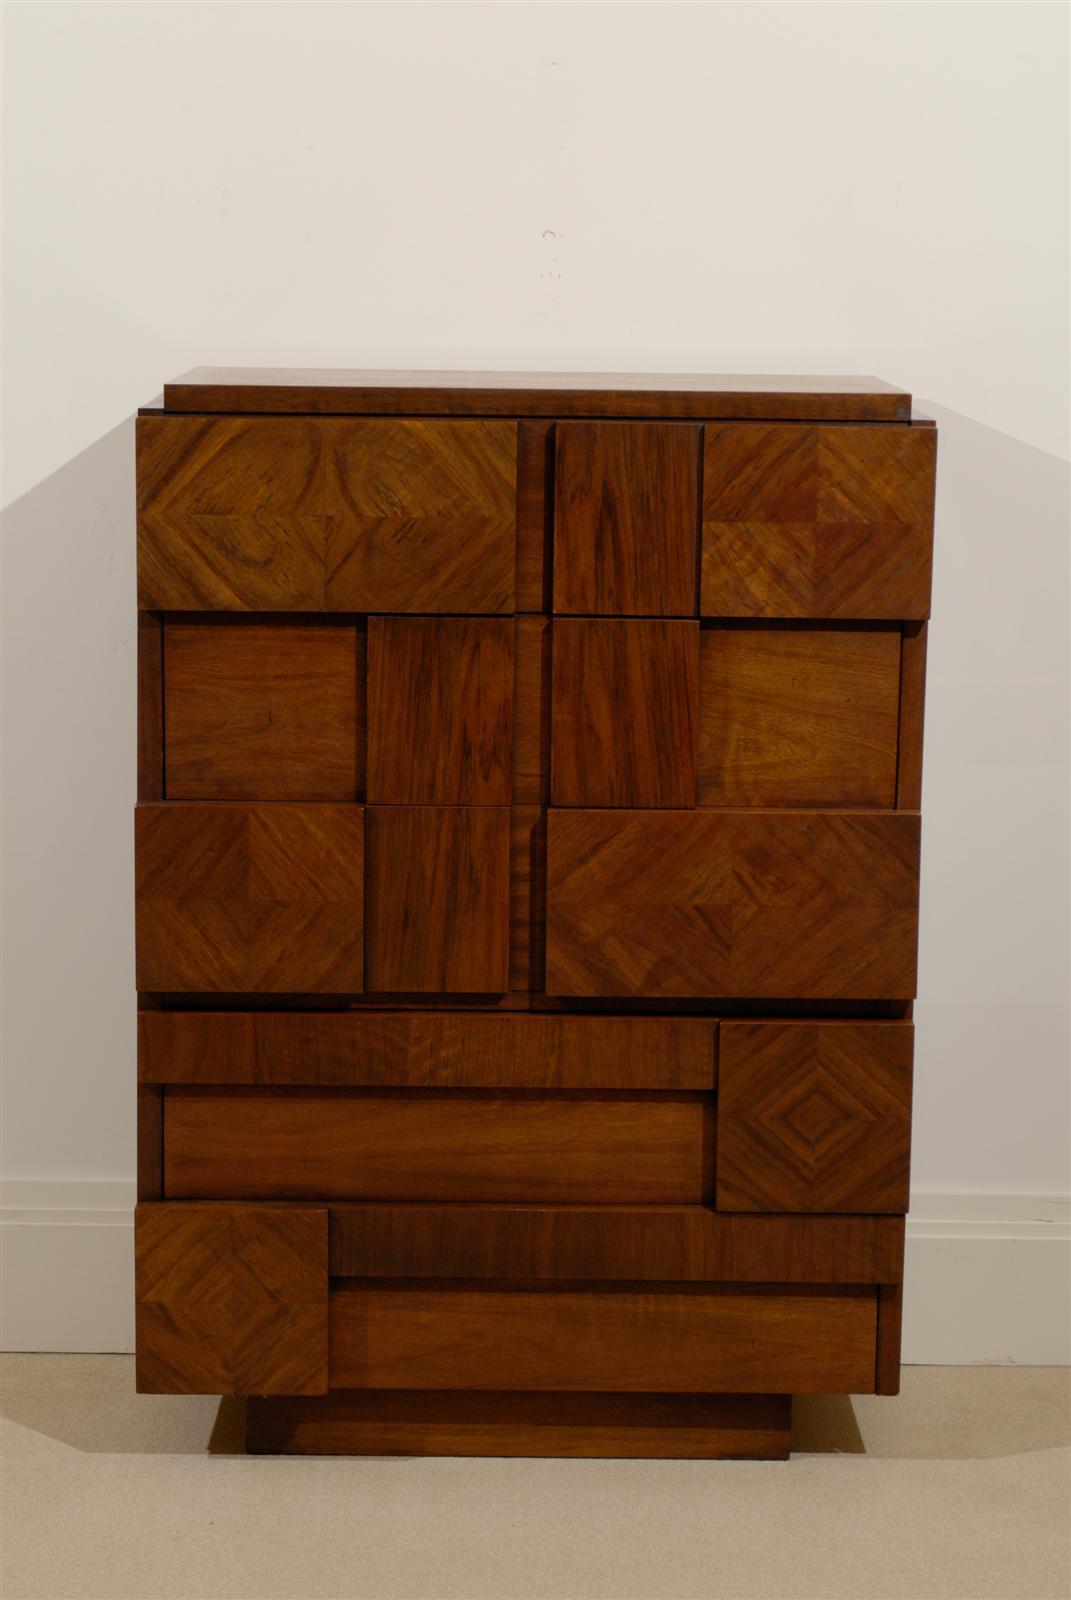 Handsome Brutalist Five Drawer Chest in Beautifuly Polished & Restored in Walnut. Made by Lane Furniture Circa 1970.